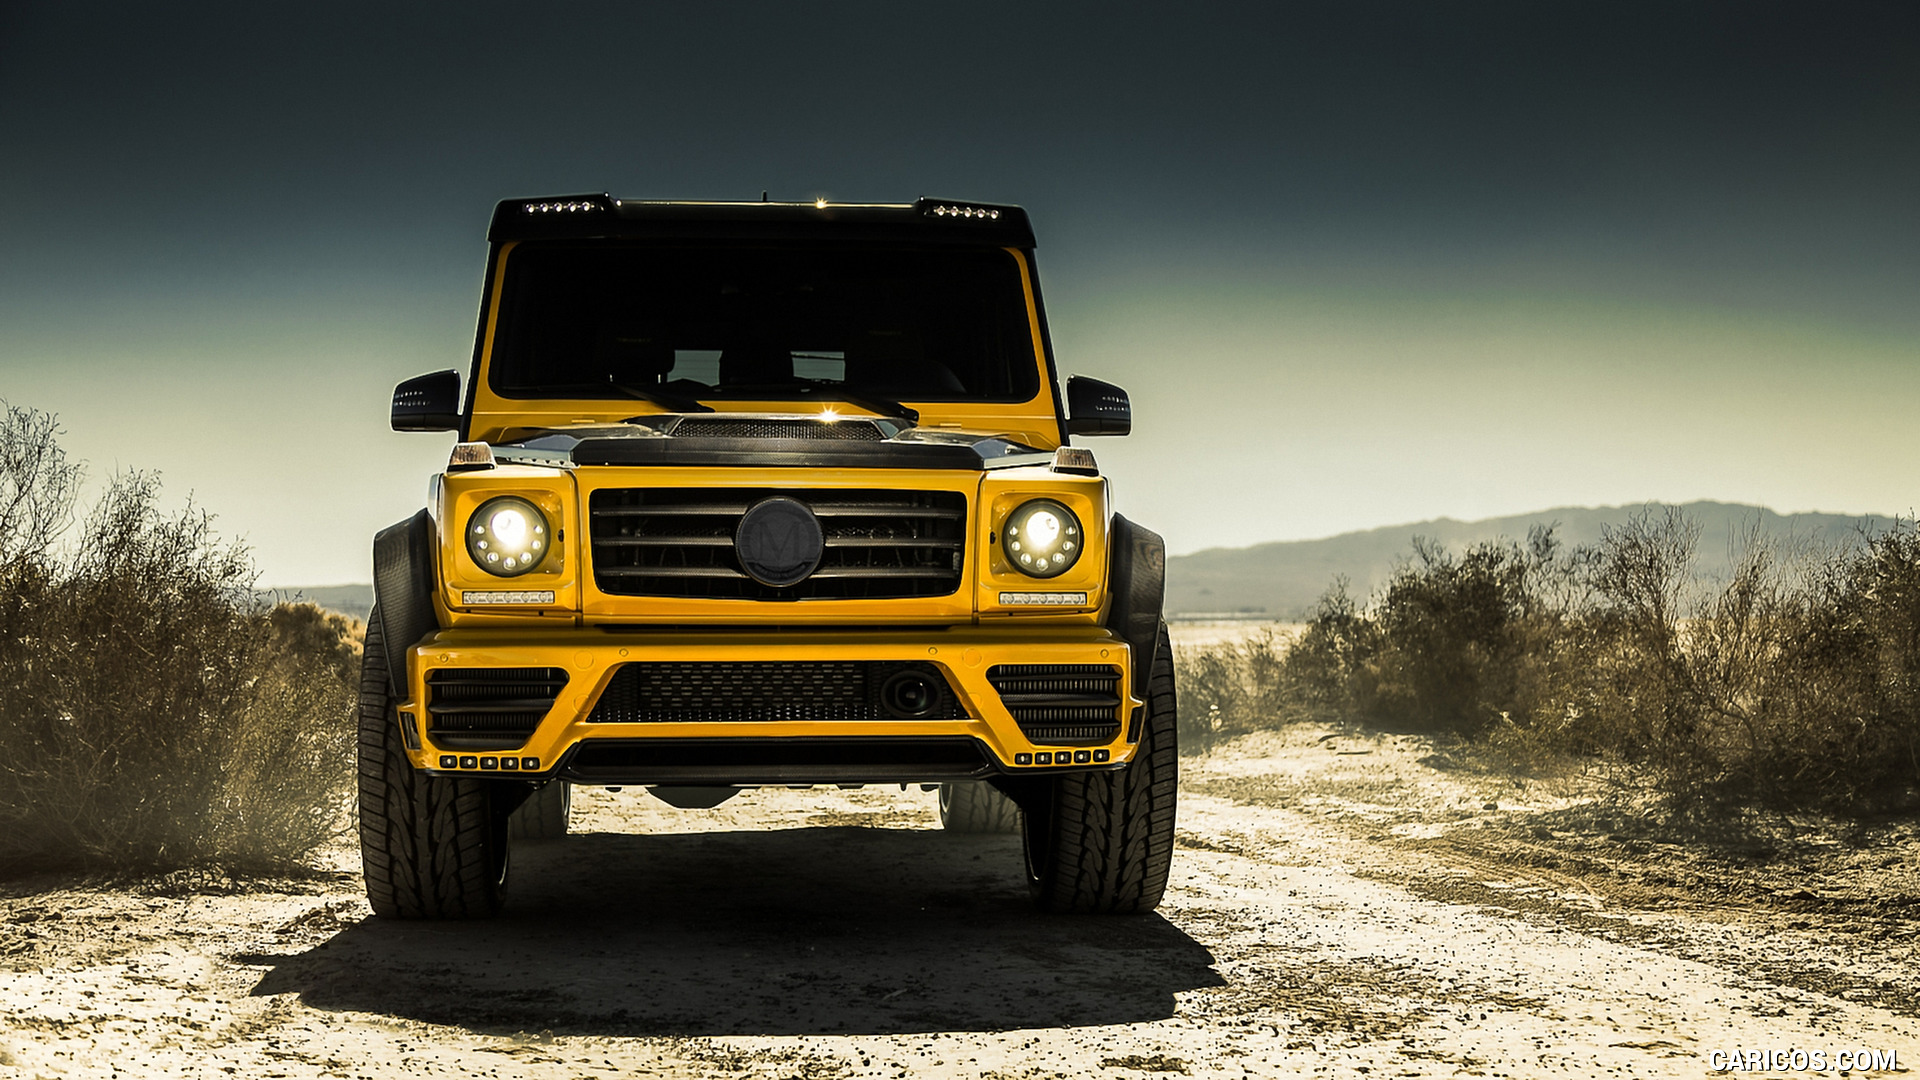 2017 MANSORY Mercedes-Benz G-Class Widebody - Front, #2 of 5